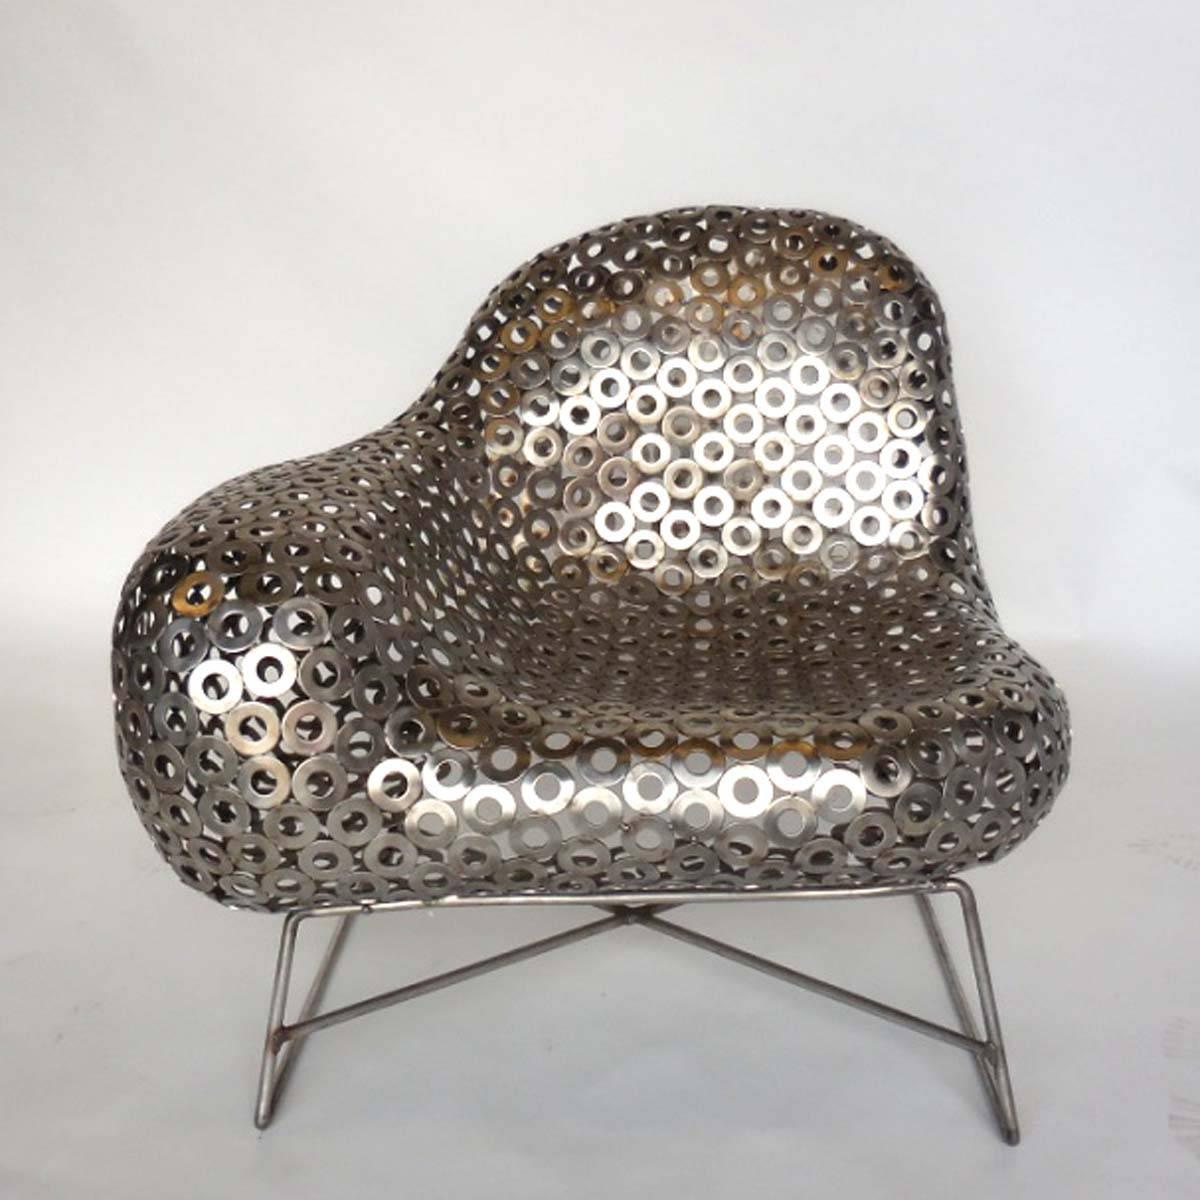 A 2011 side chair made by artist John Andrews. Made from stainless steel washers. Works great indoor or outside.
Handmade.